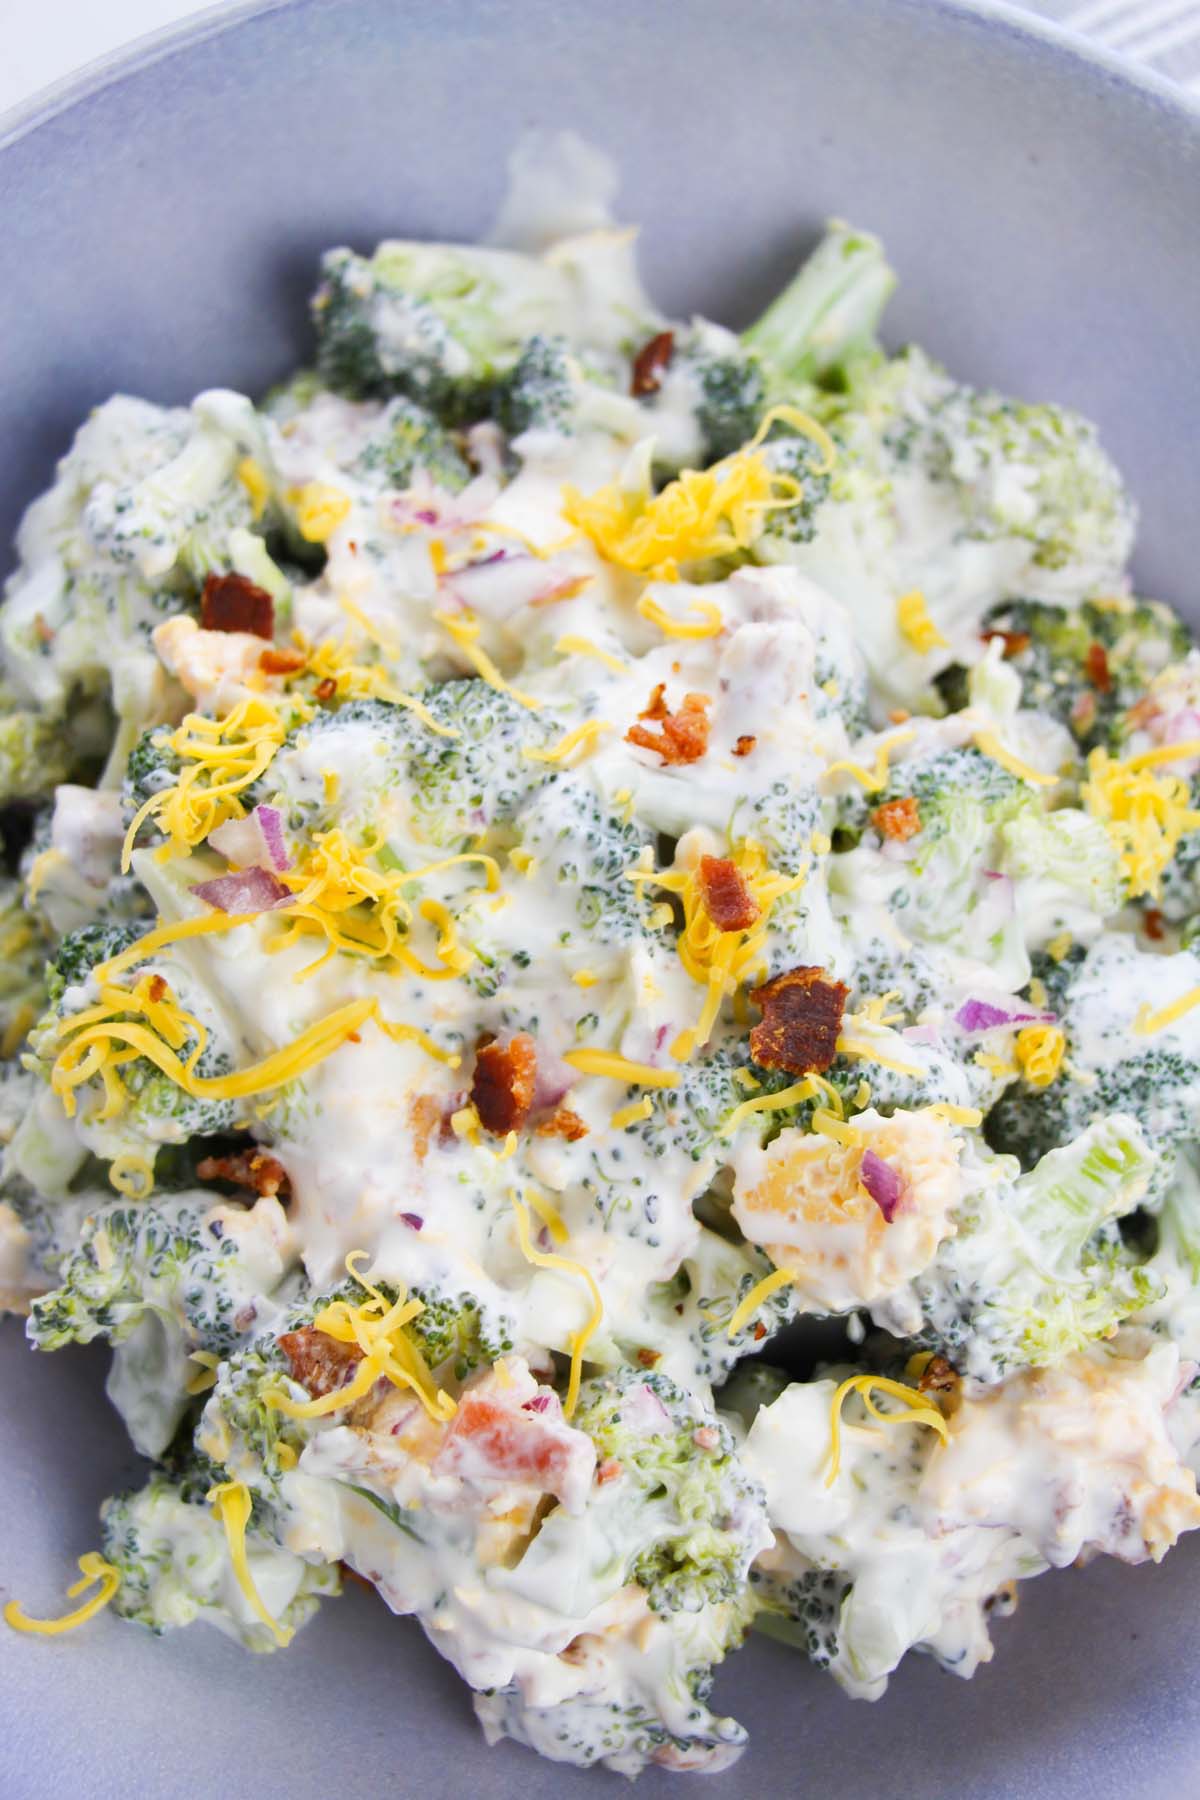 Broccoli salad topped with bacon bits.